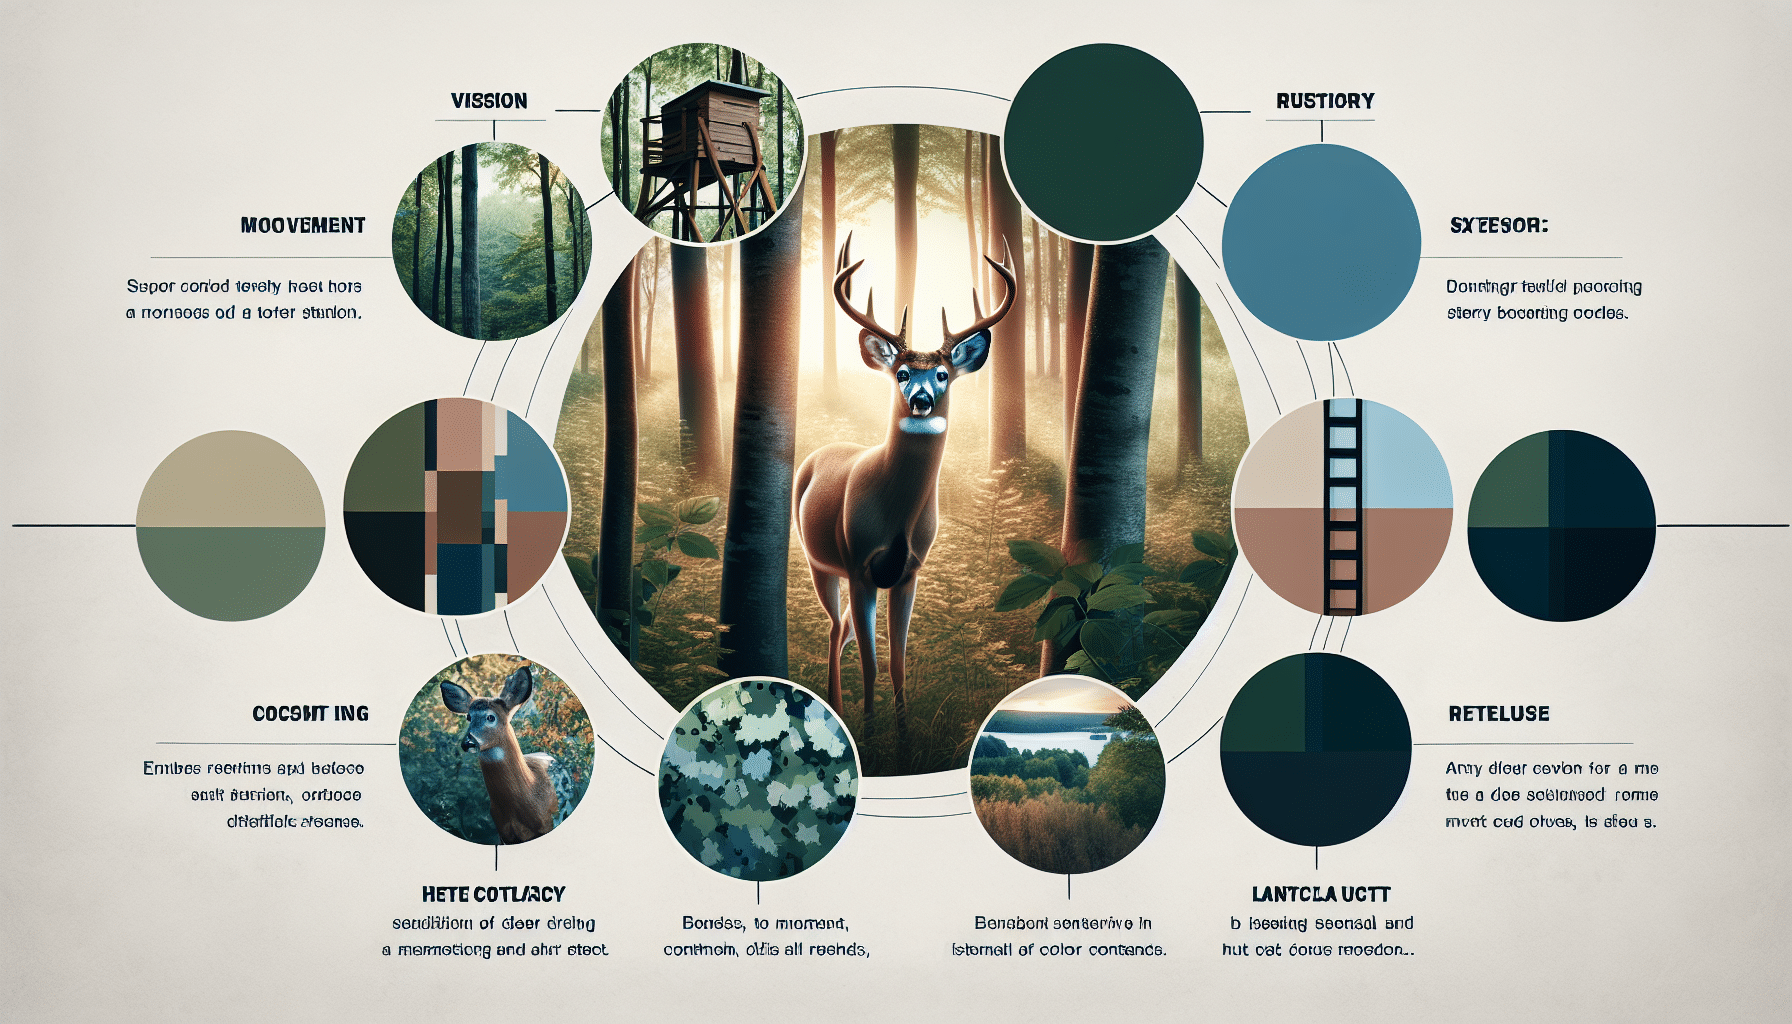 An image highlighting the vision of a deer in a forest setting, showcasing their sensitivity to movement and color contrasts in their environment. Also, include aspects of a typical hunting strategy such as a tree stand and camouflage materials without any human presence. Lastly, showcase the deer's behavior such as being tentative and alert in response to the hint of potential danger.